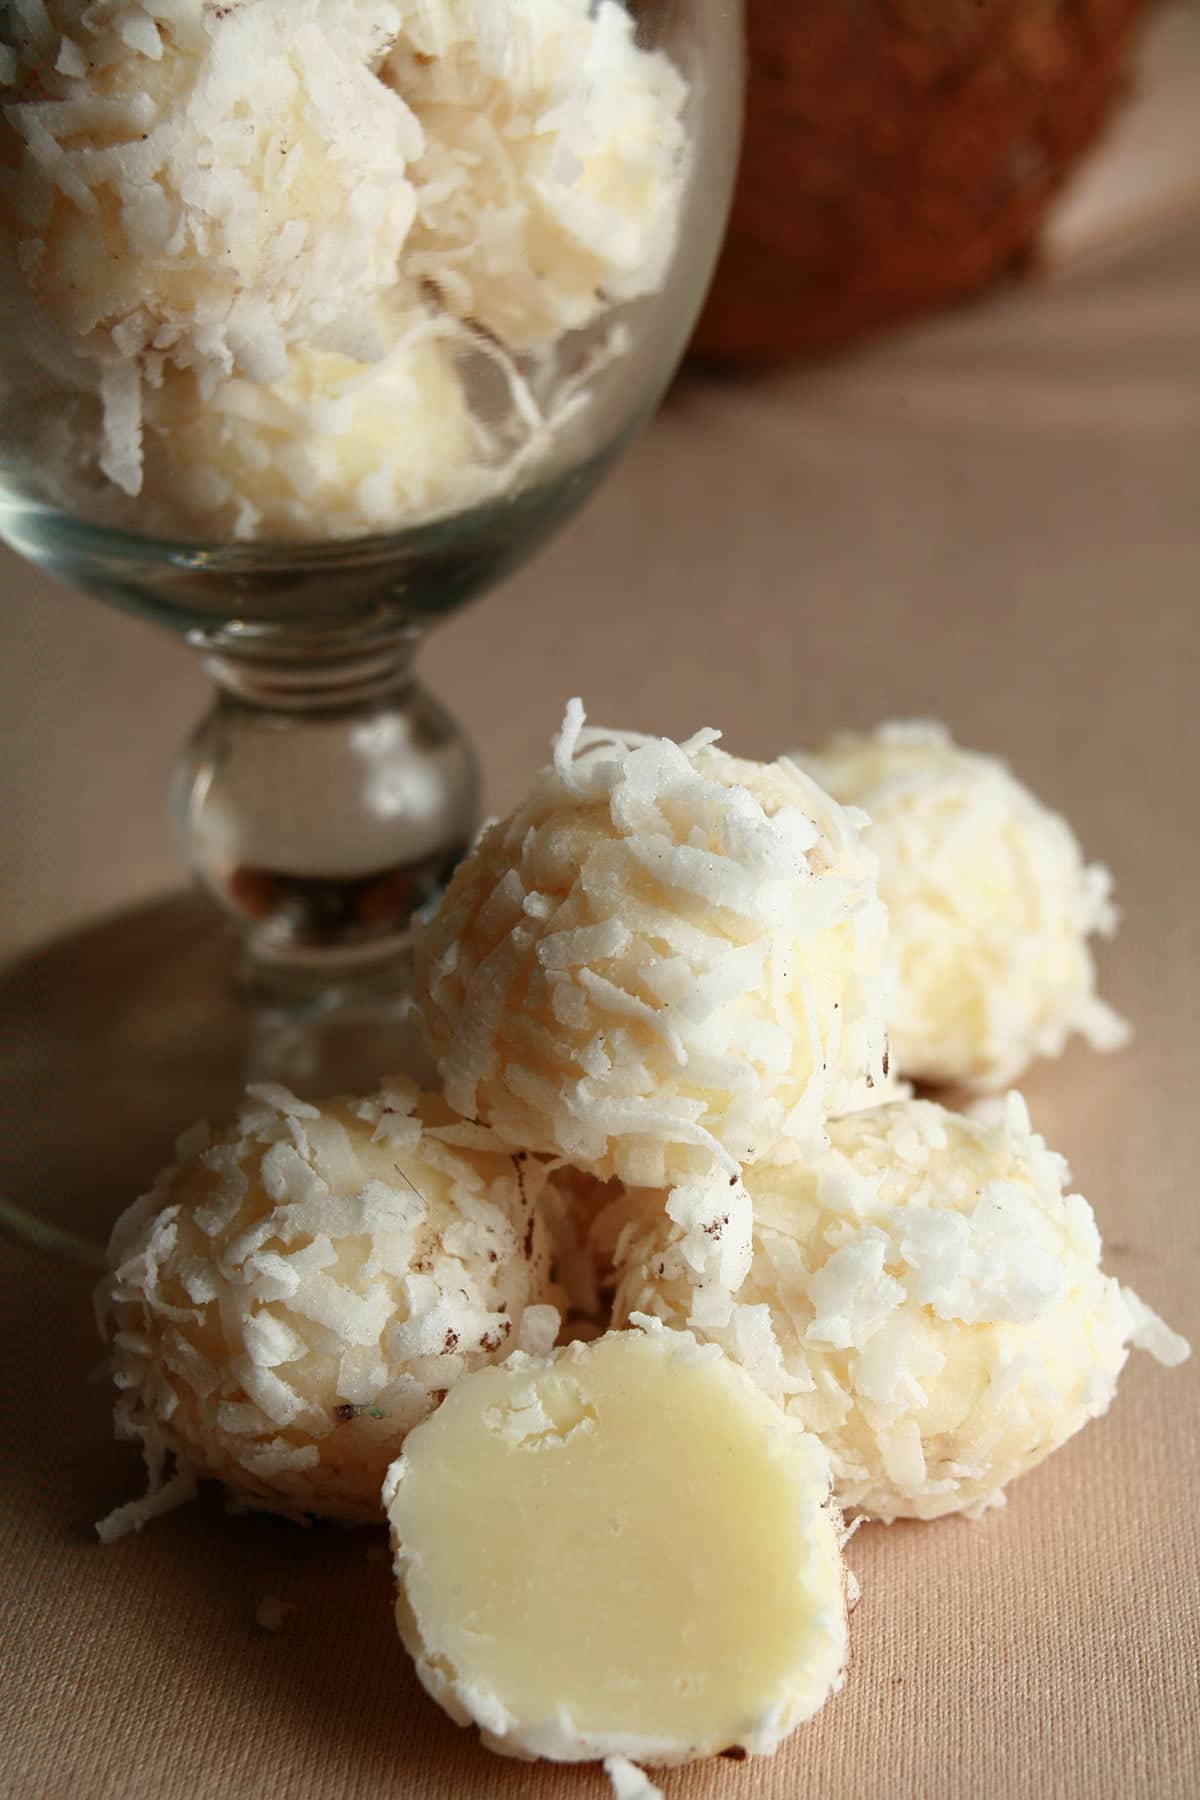 Several Coconut Covered White Chocolate Truffles are piled at the base of a cocktail glass. More truffles are contained within the glass, and there is a coconut behind it.